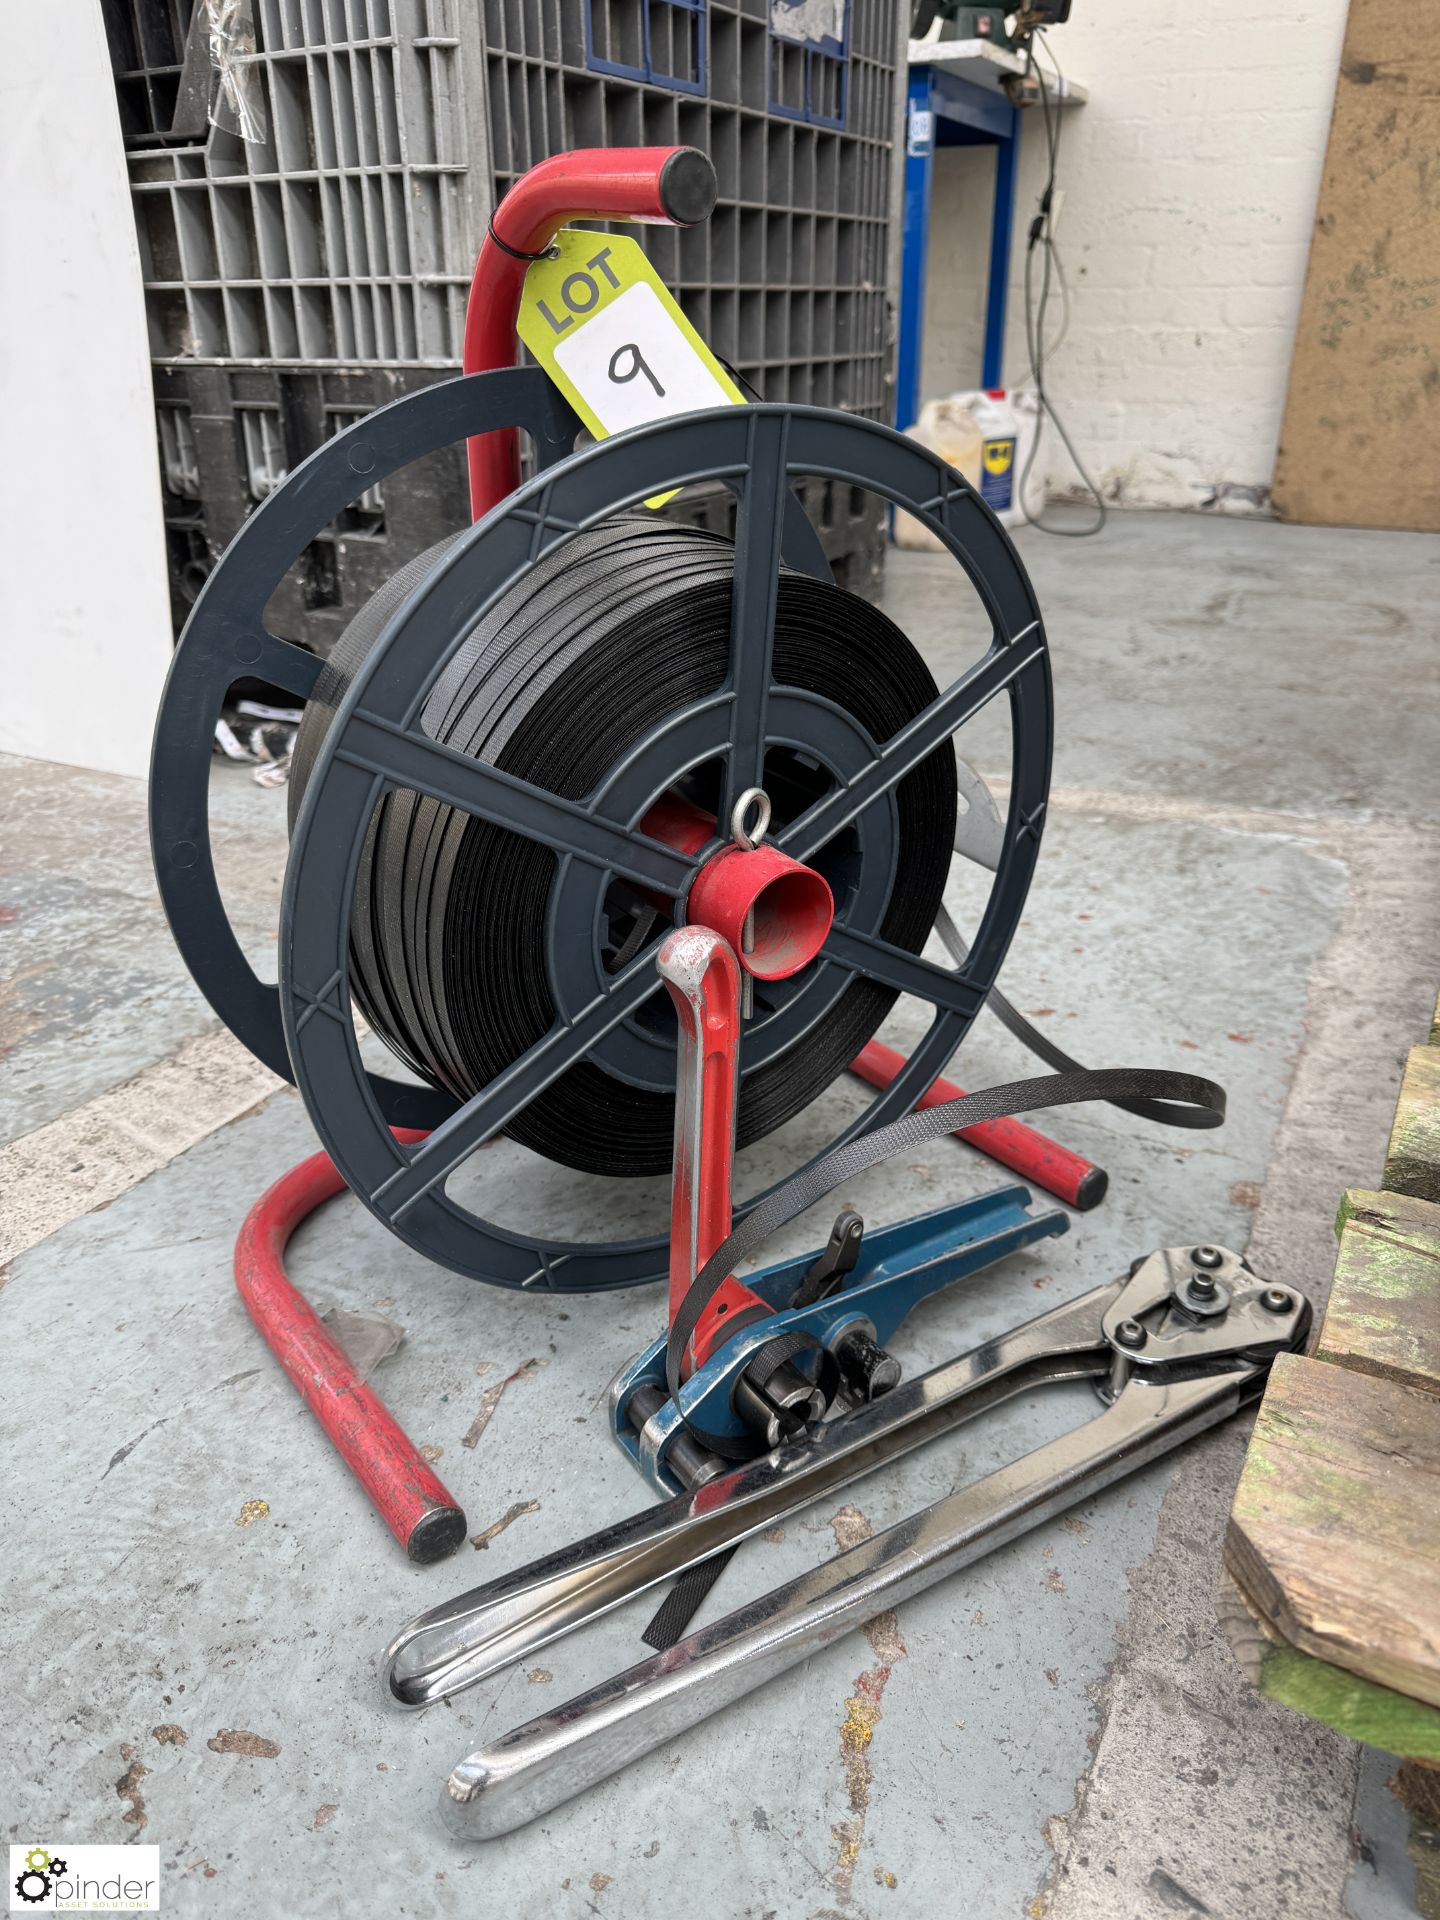 Tensioner, Cleat Crimper and roll Strapping